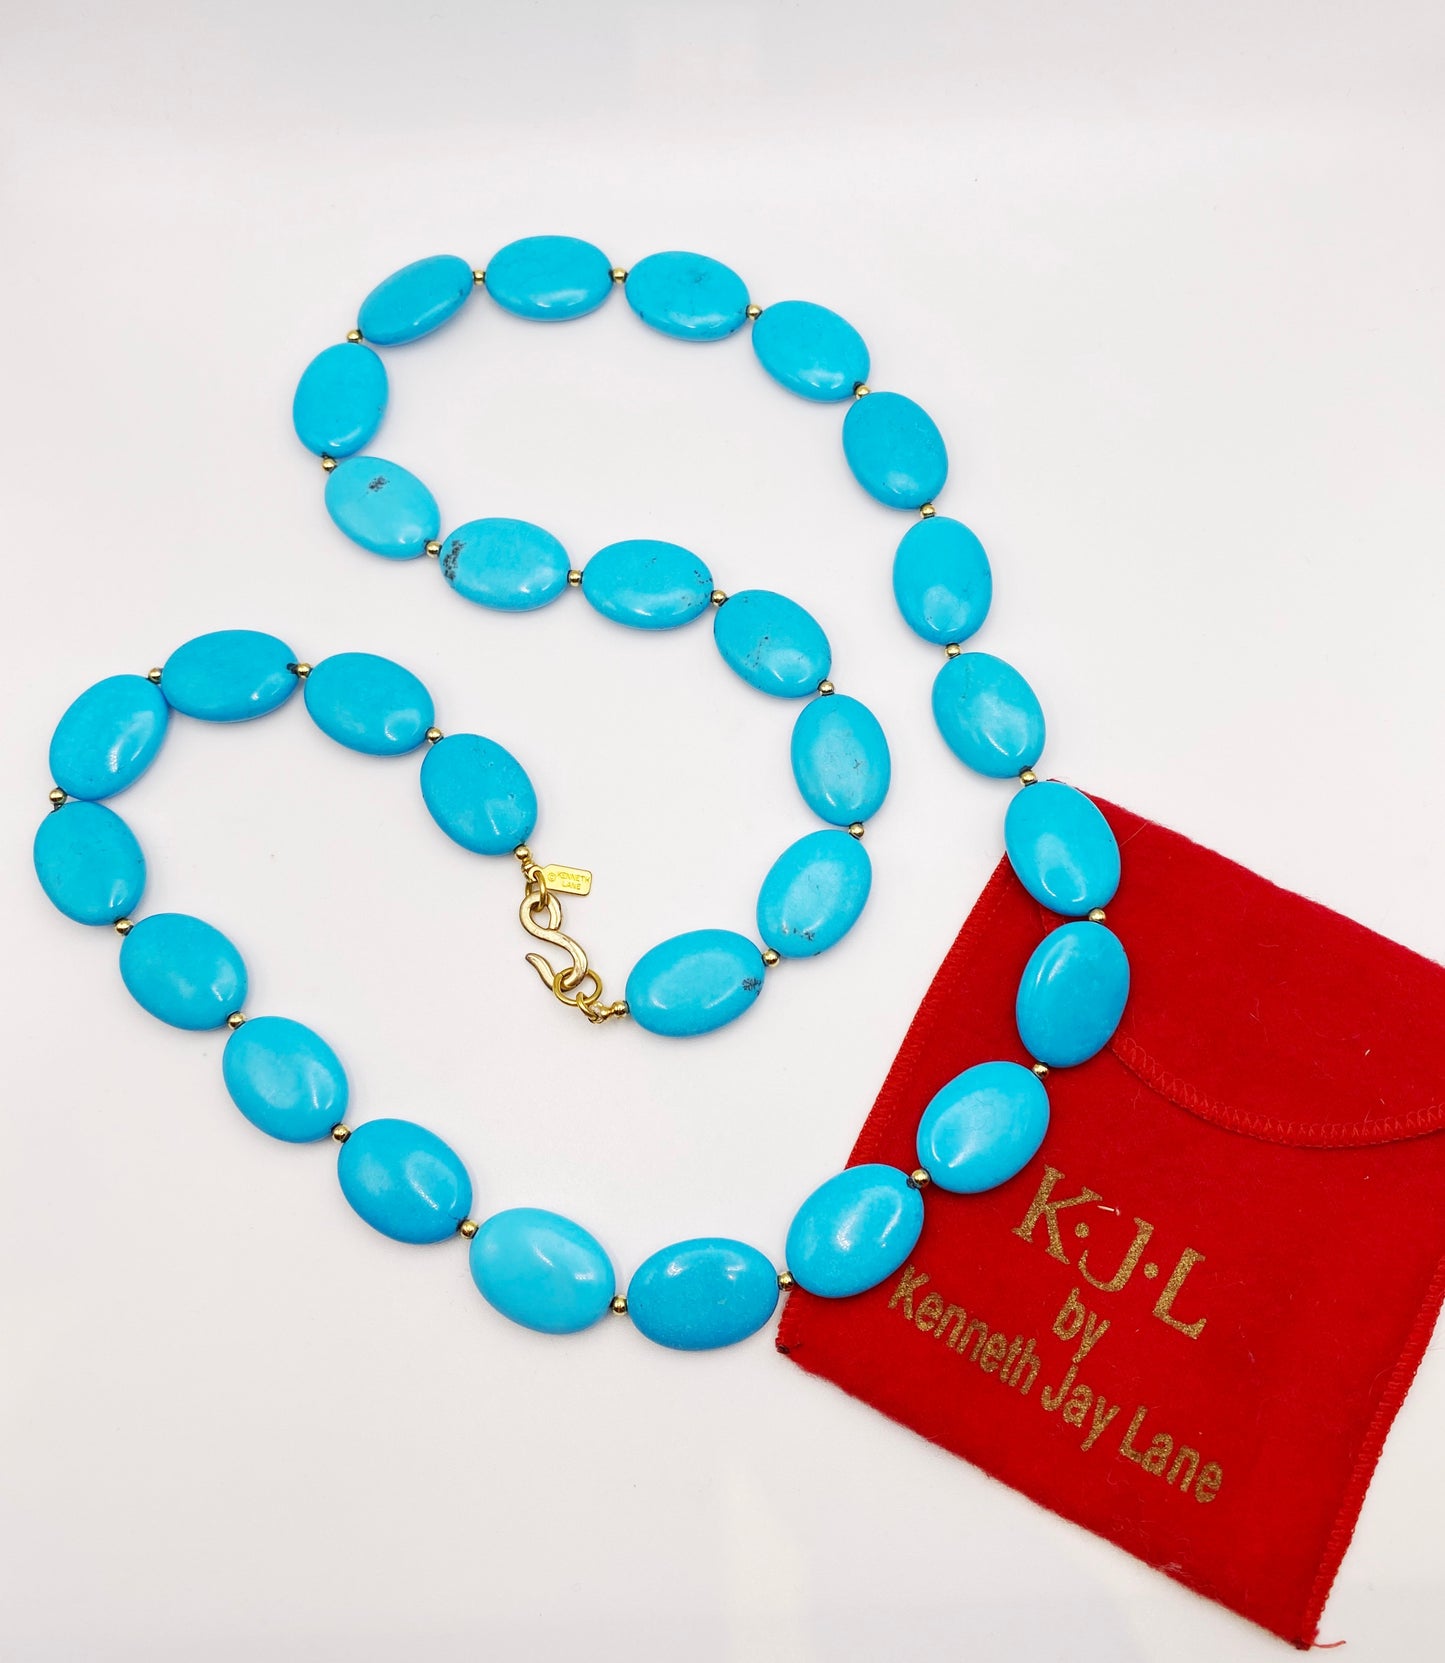 Kenneth Jay Lane Faux Turquoise Necklace